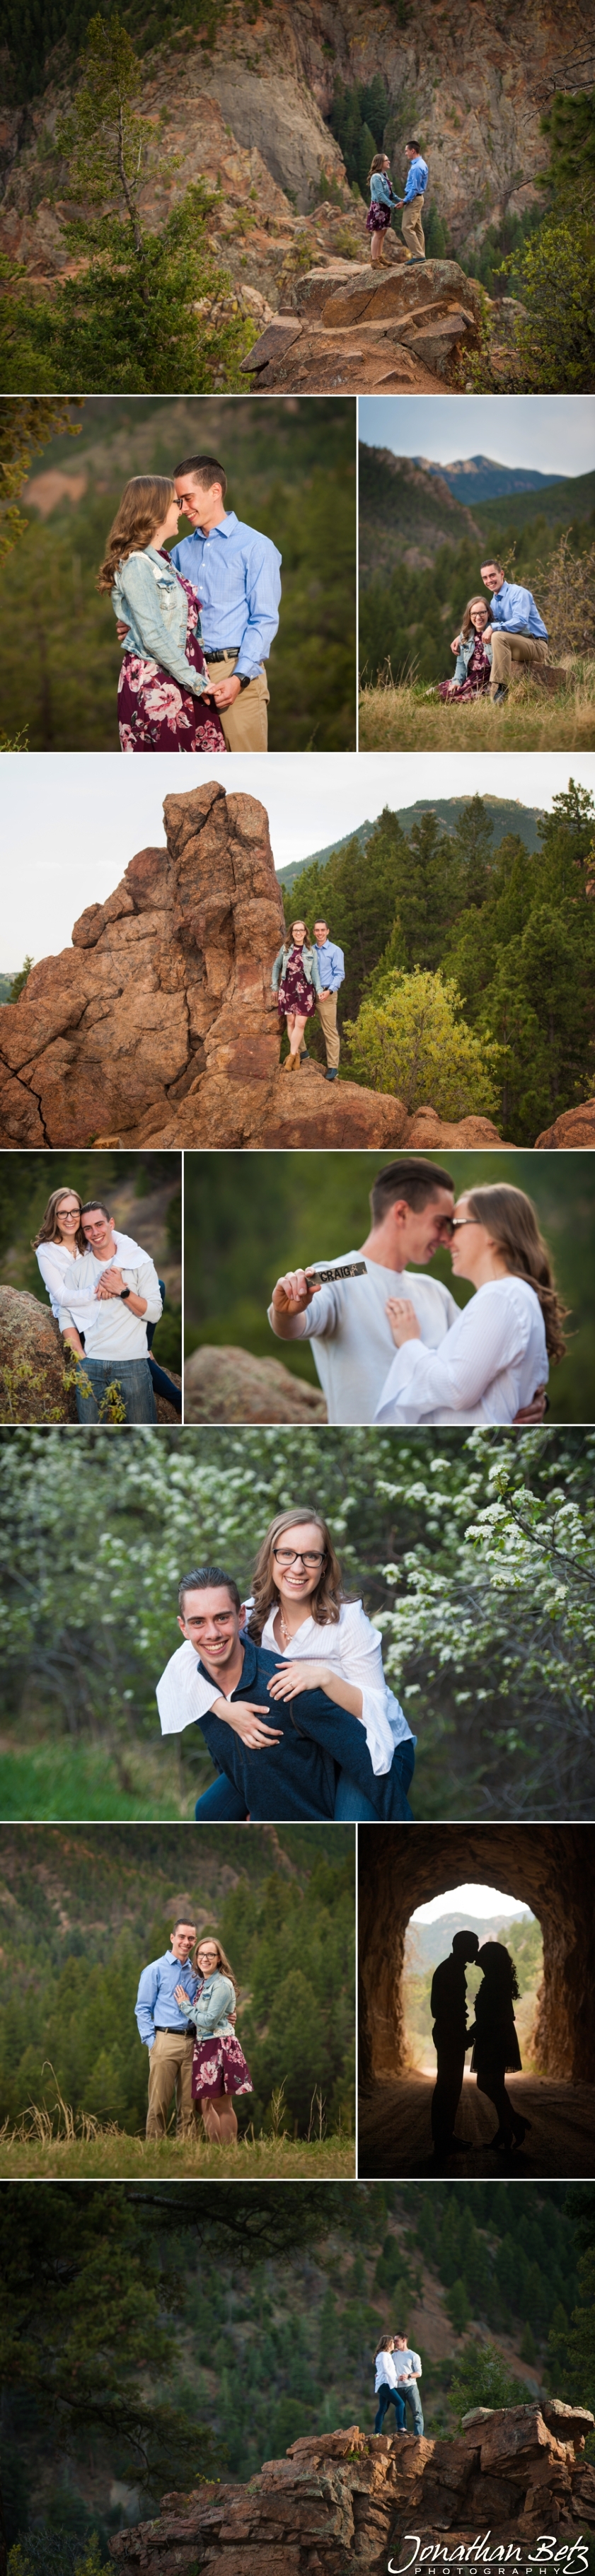 Colorado Springs Engagement Pictures Jonathan Betz Photography Wedding Photographer 1